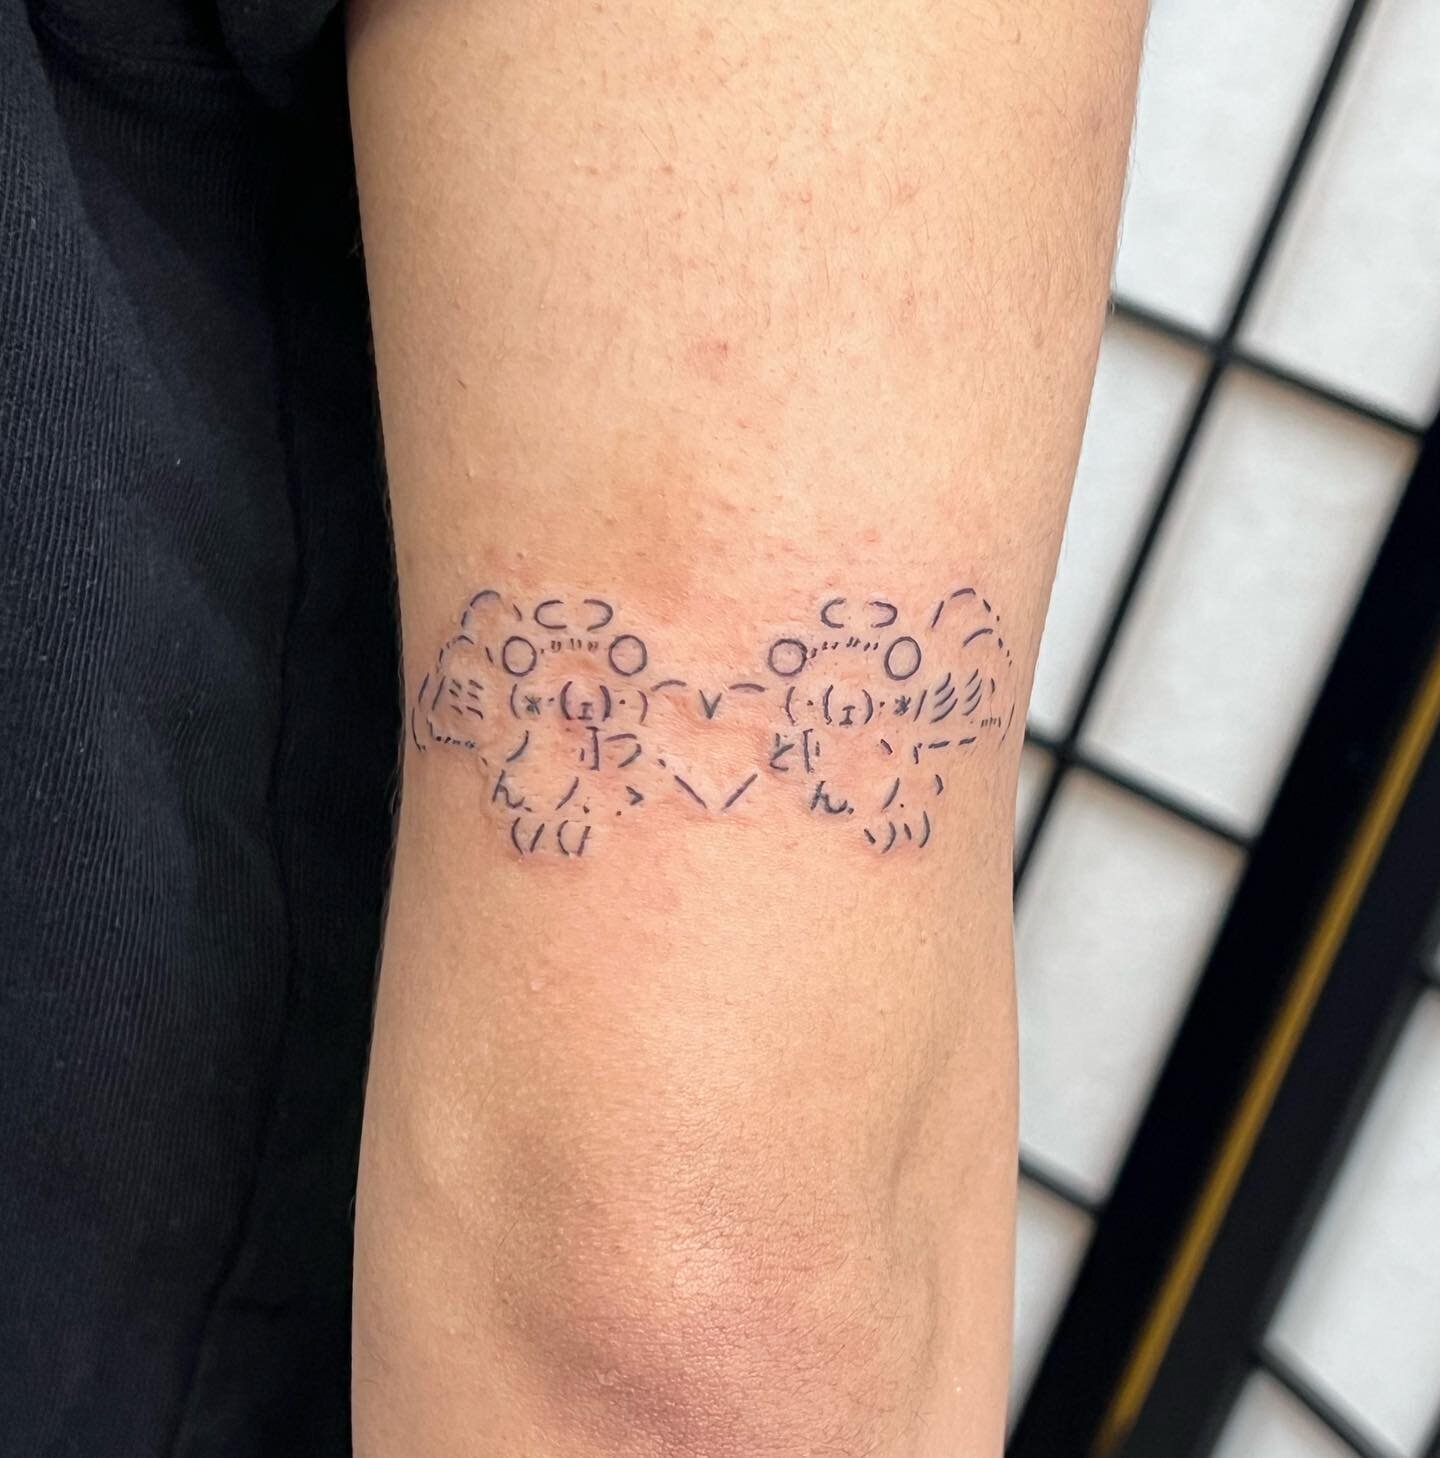 Text based line art tattoo! 🐻💕 #queer #queerart #queerartist #queertattooer #queertattooartist #qttr #milwaukee #milwaukeetattoo #milwaukeetattoos #milwaukeetattooartist #wisconsintattooartists #linearttattoo #linearttattoos #textbasedart #textbase